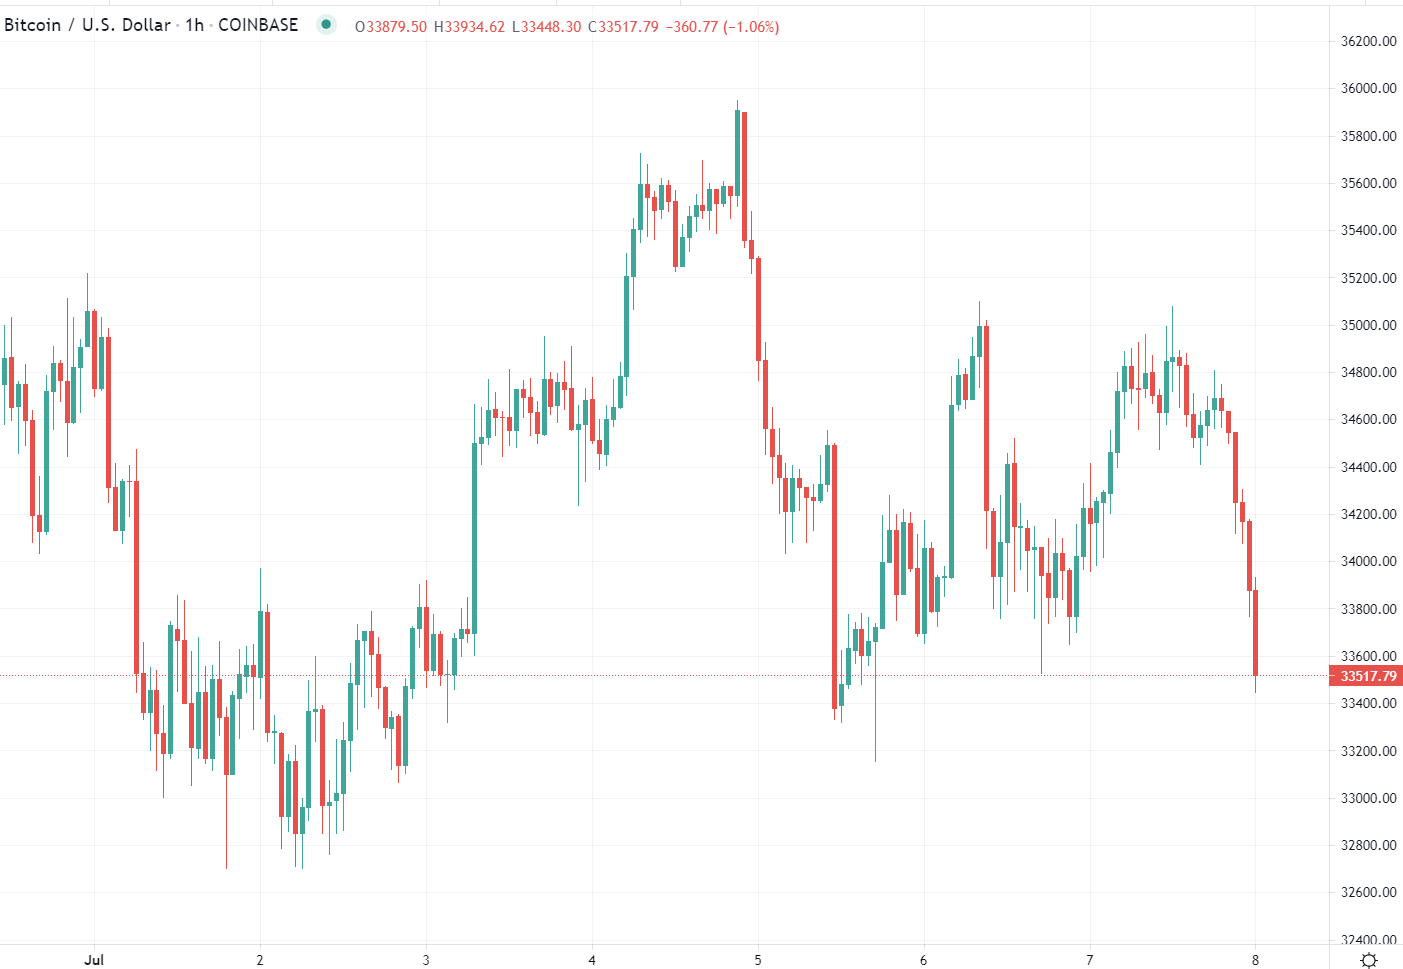 Just noting to little slide in BTC/USD in the past few hours  